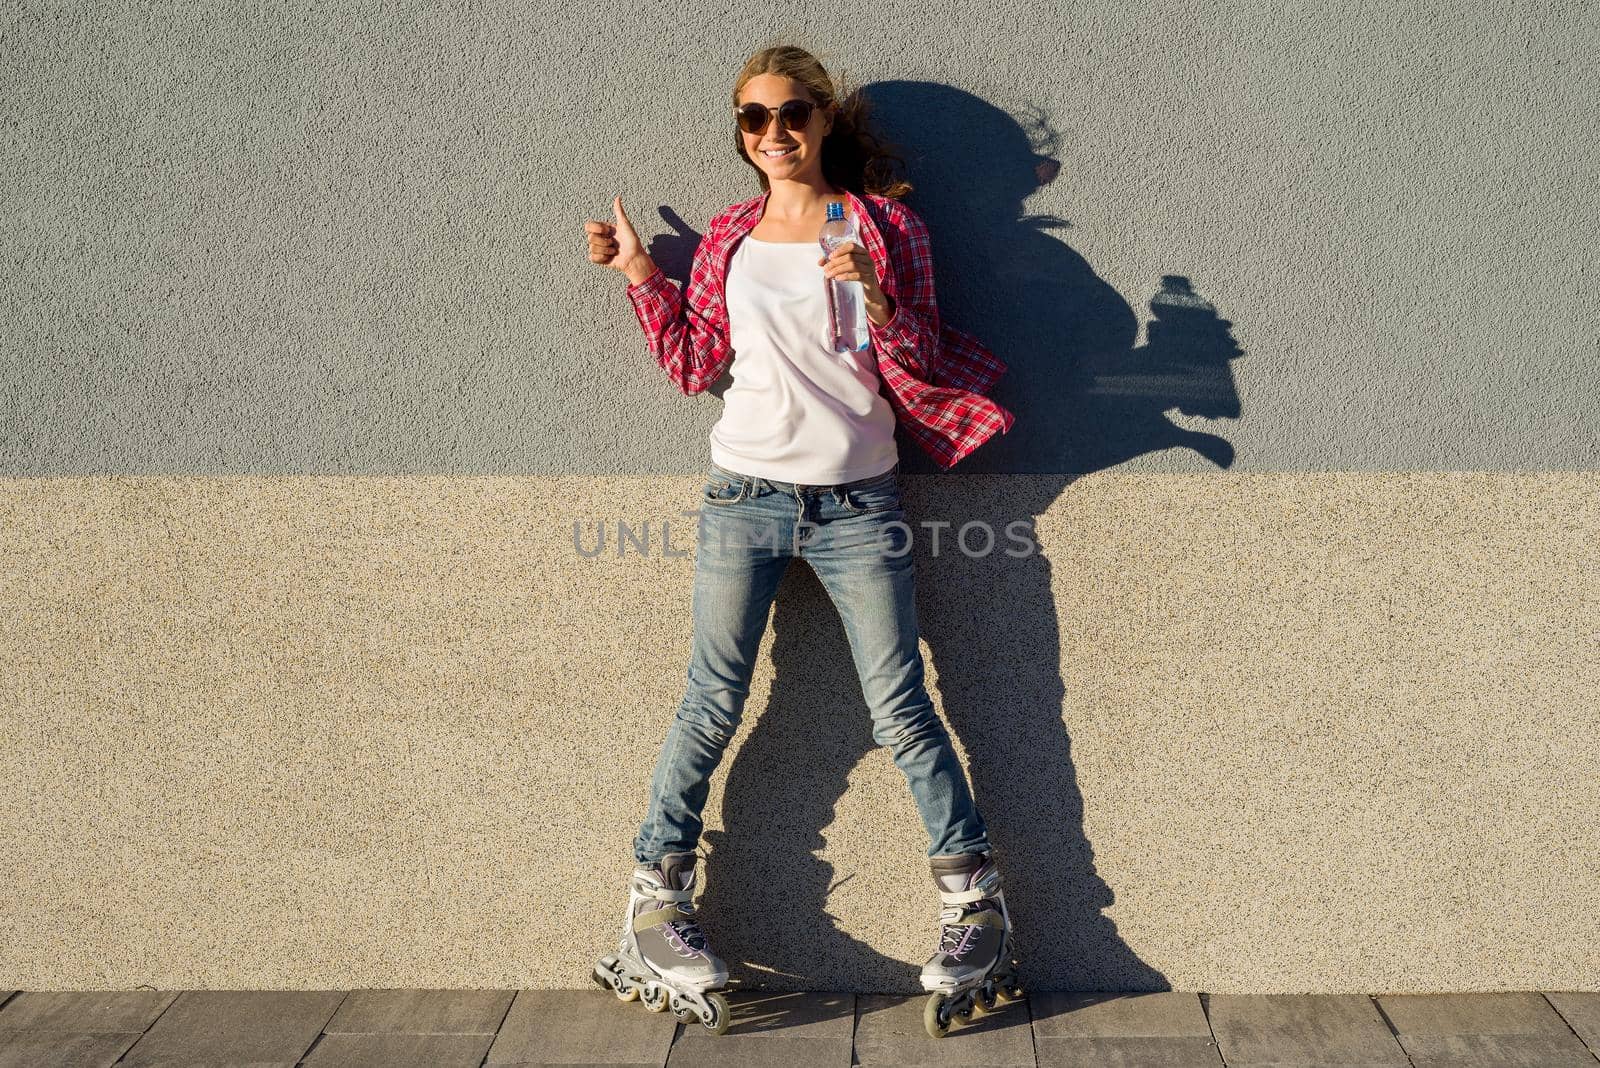 Portrait of young cool smiling girl shod in rollerblades, holding a water bottle and showing a thumbs up. by VH-studio